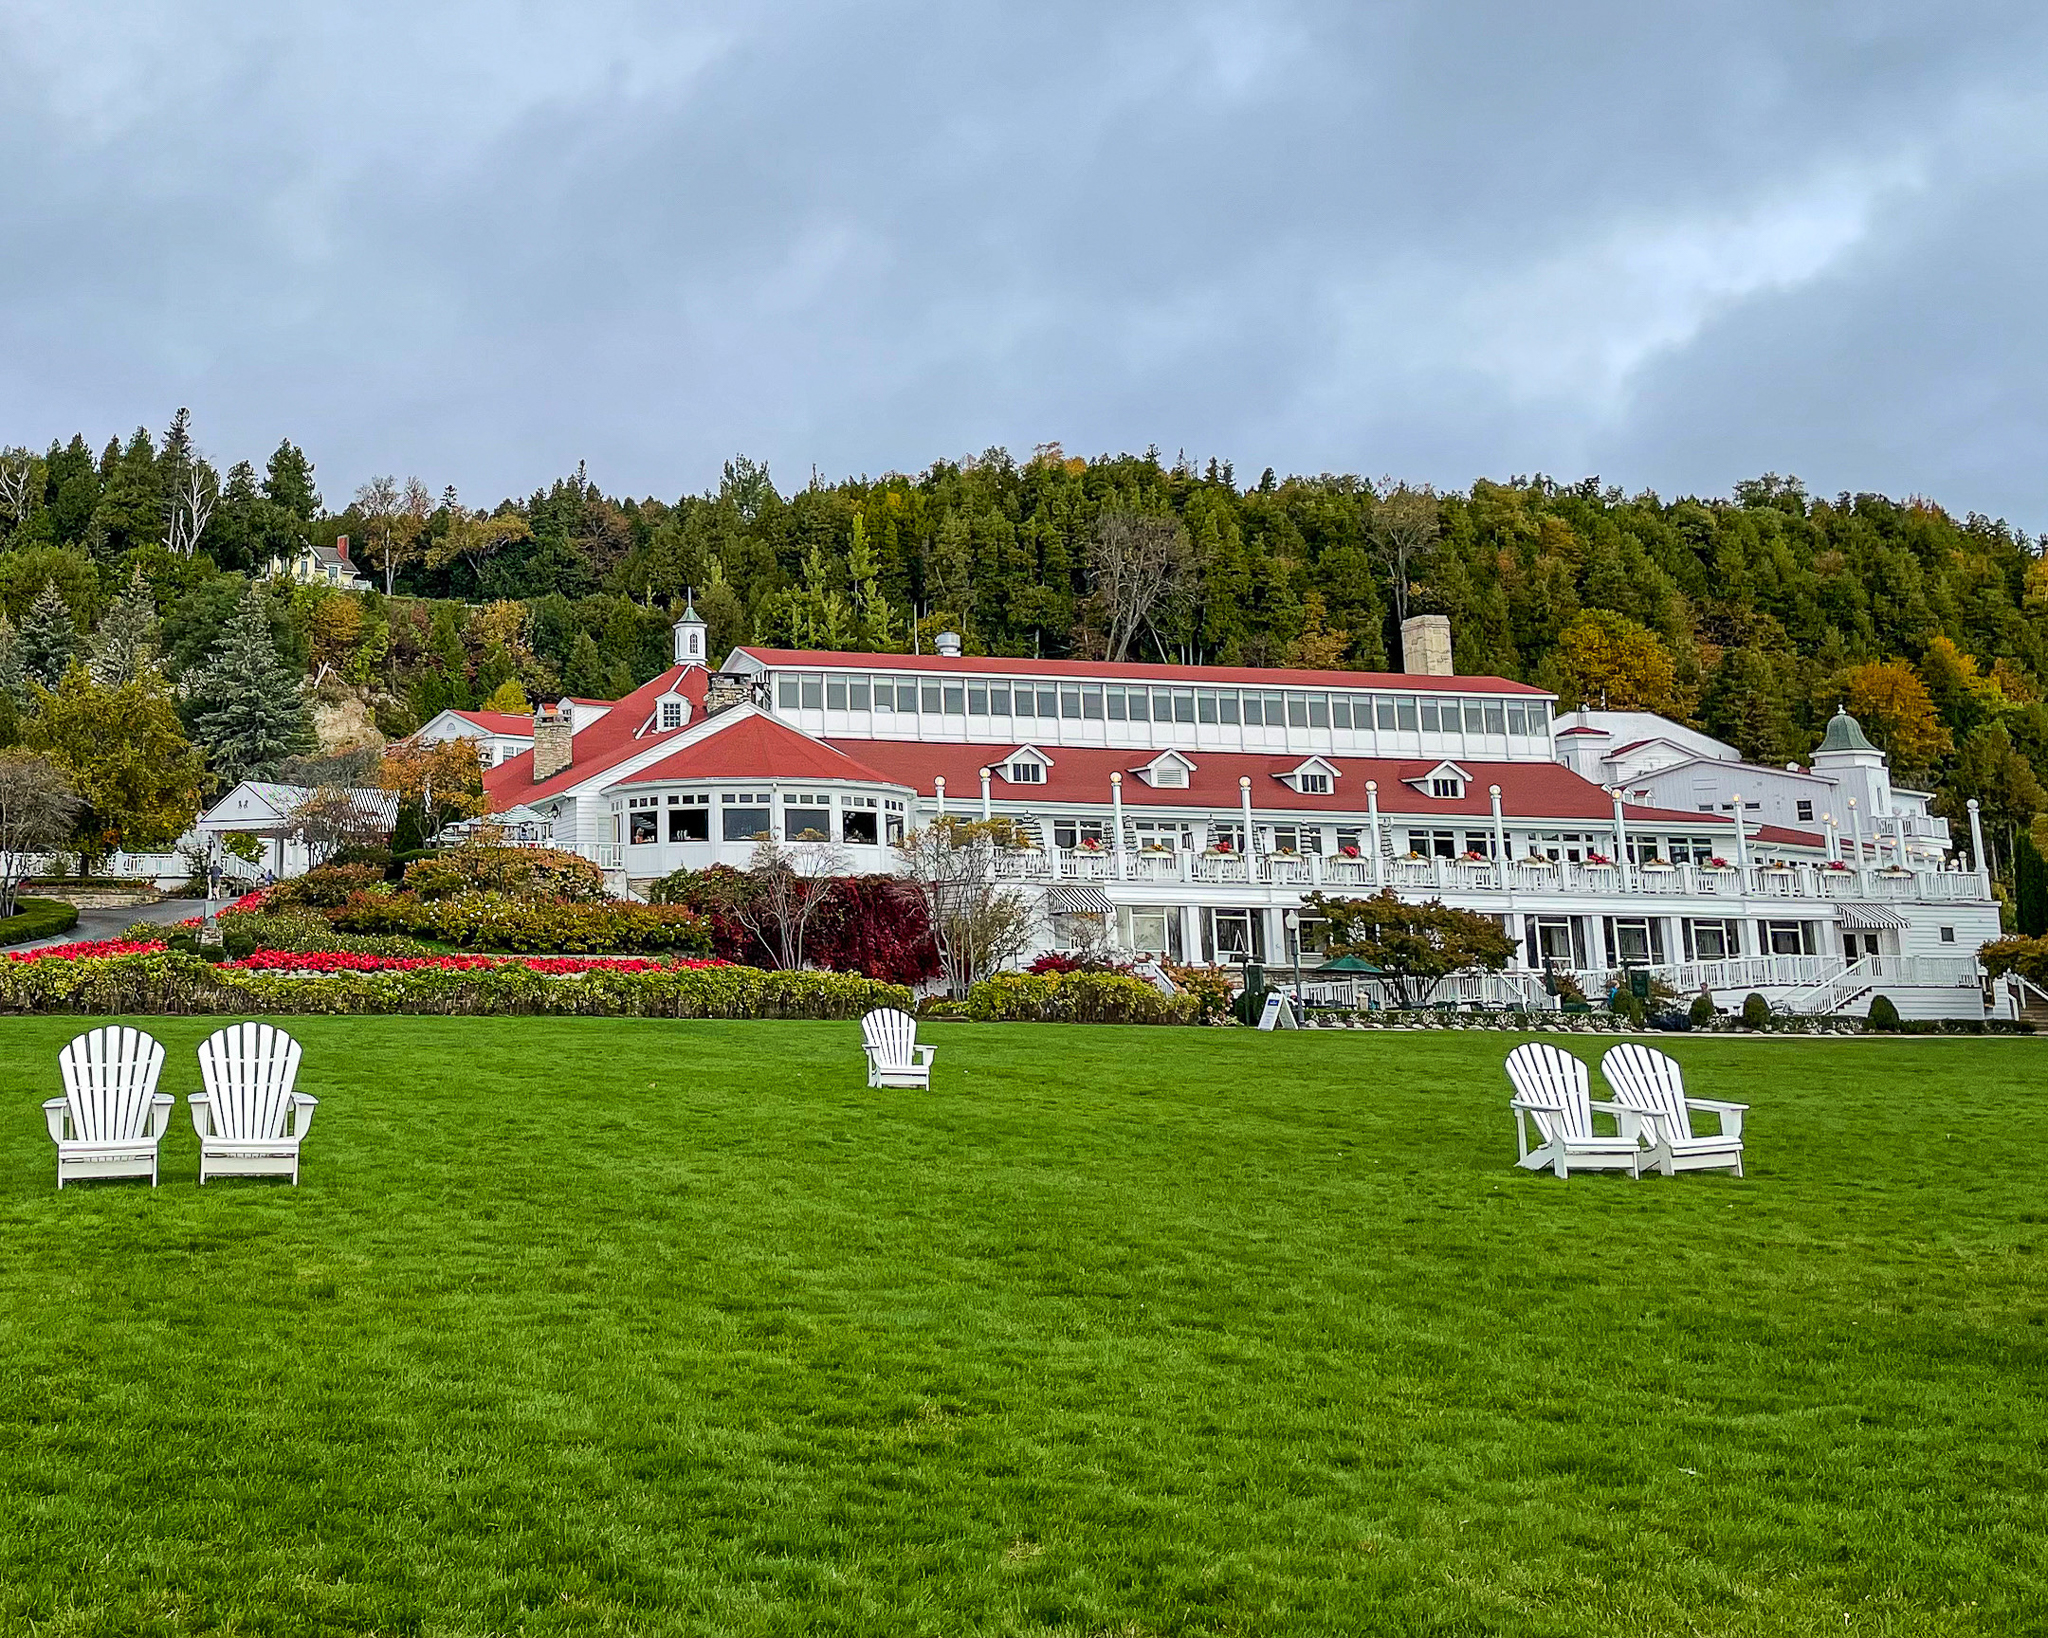 massive Great Lawn, dotted with Adirondack chairs, at Mission Point Resort Mackinac Island